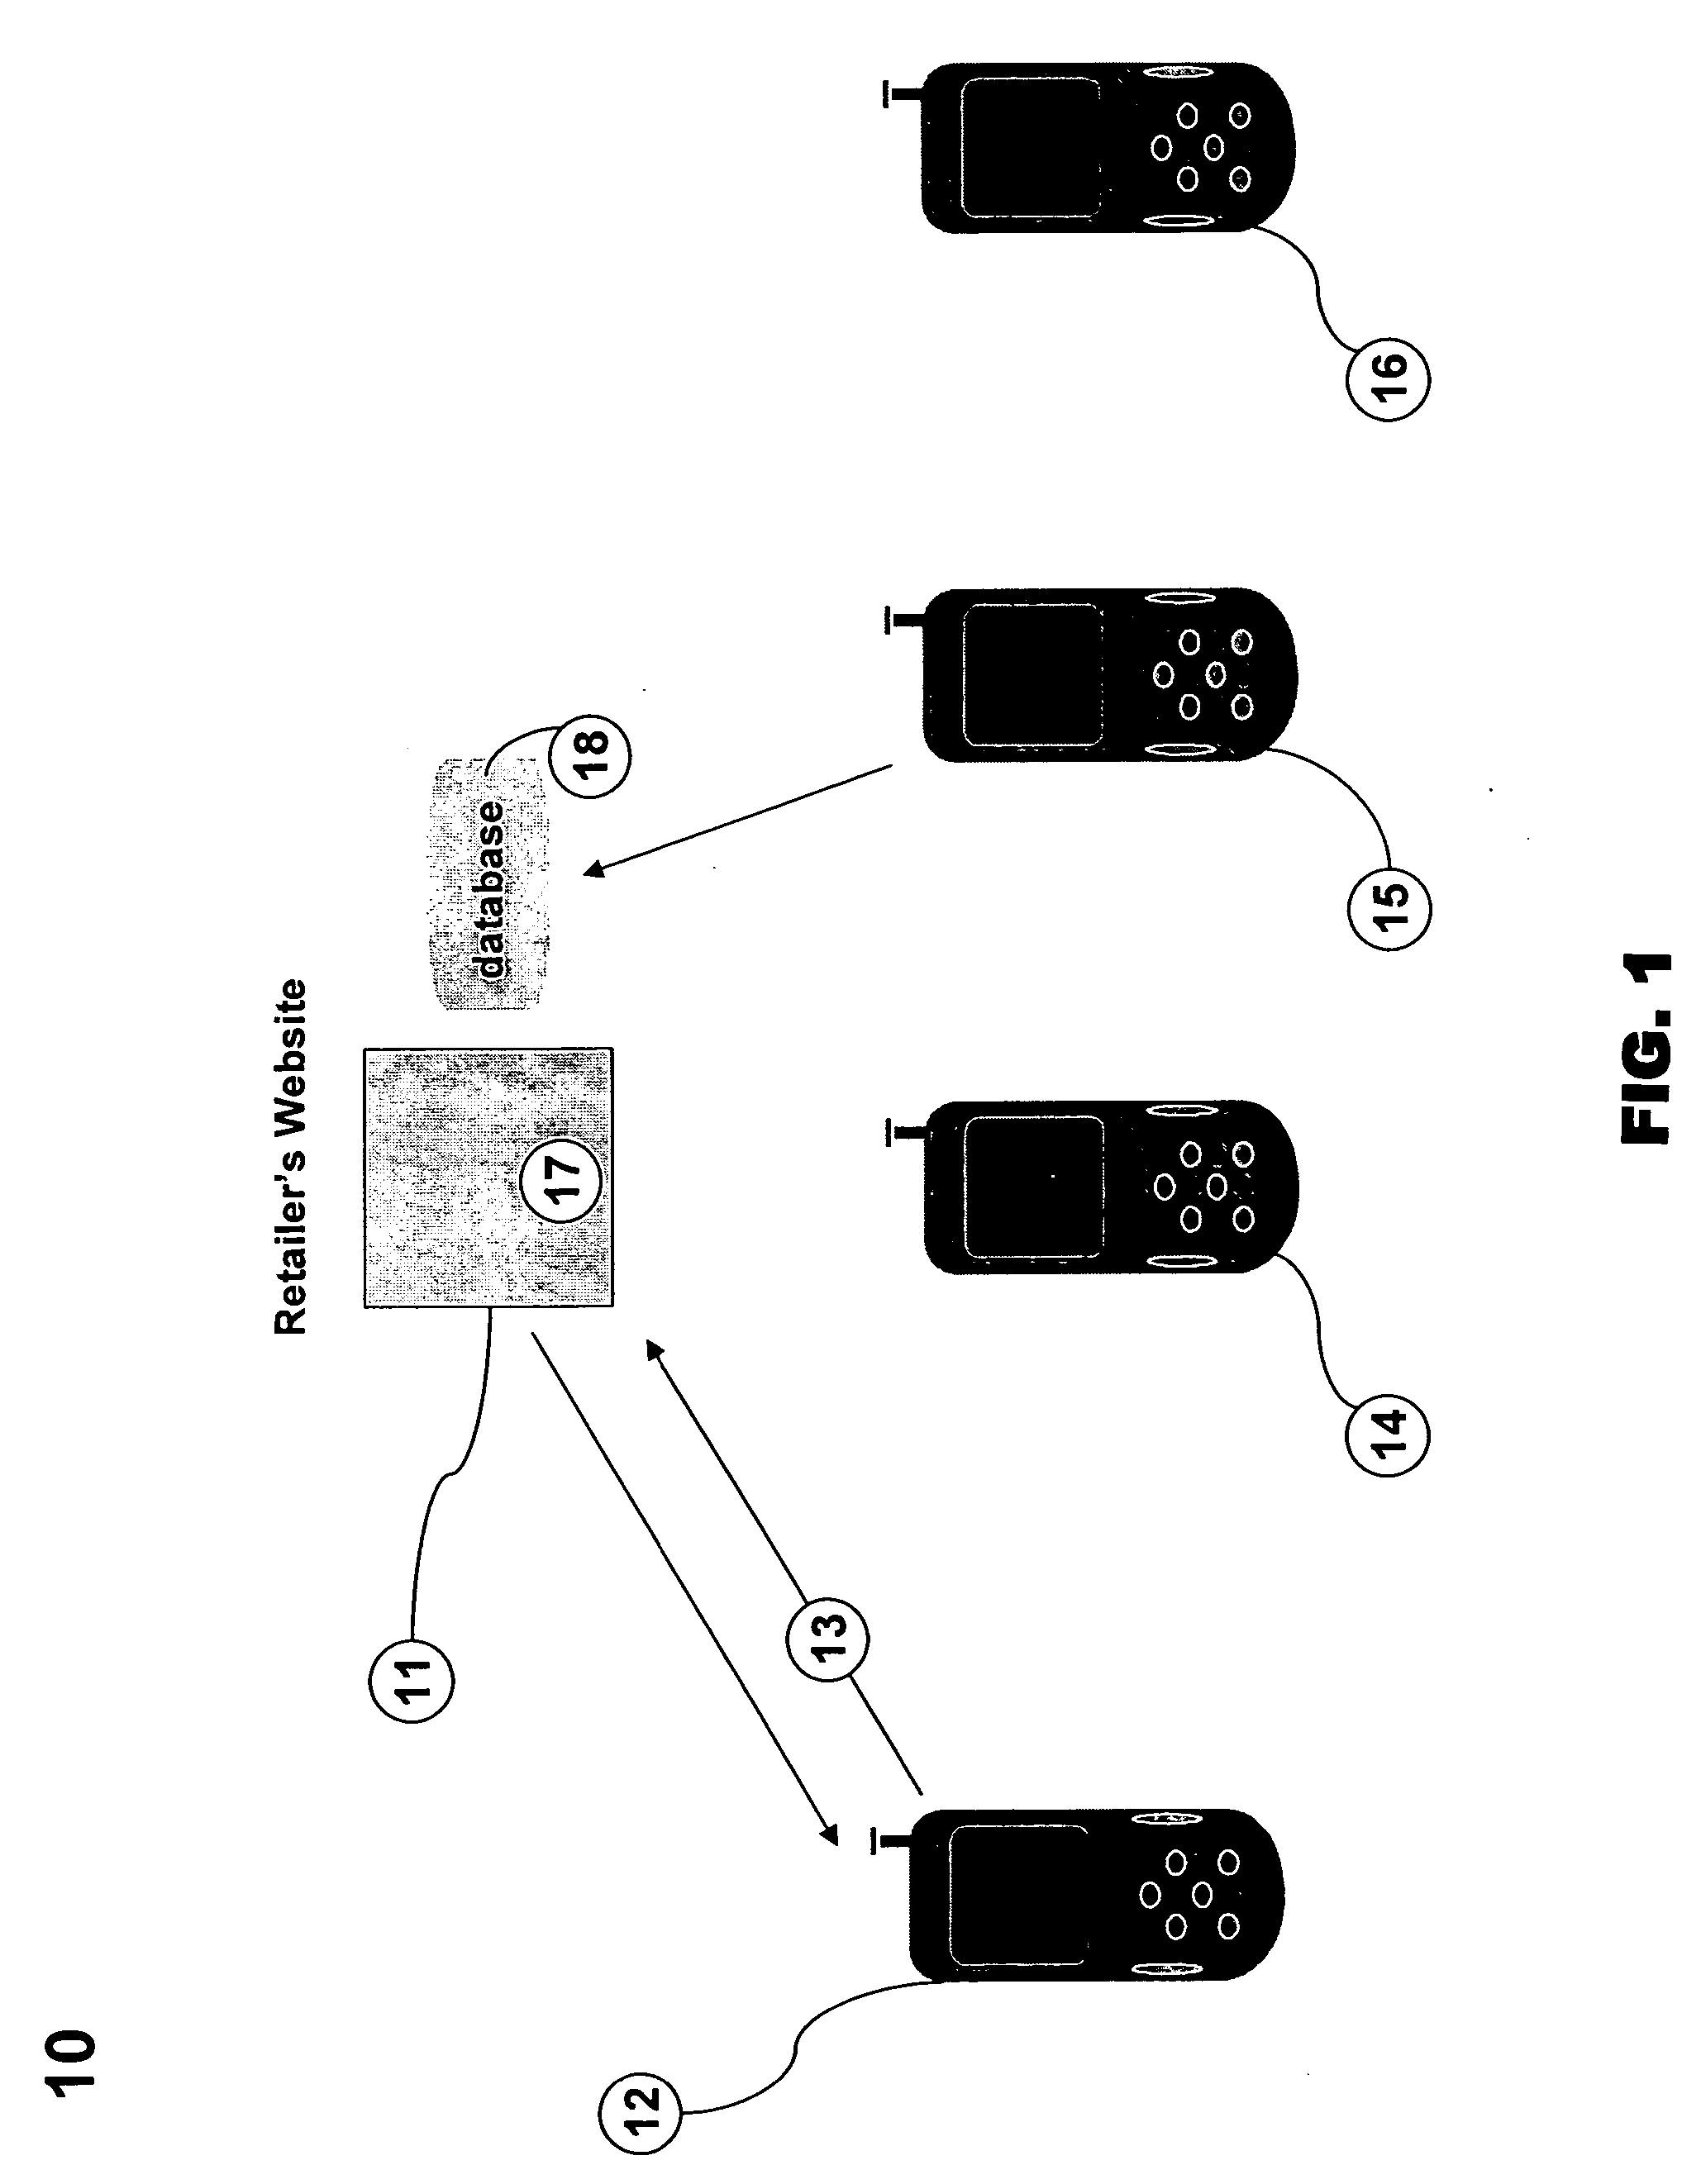 Wirelessly deliverable and redeemable secure couponing system and method